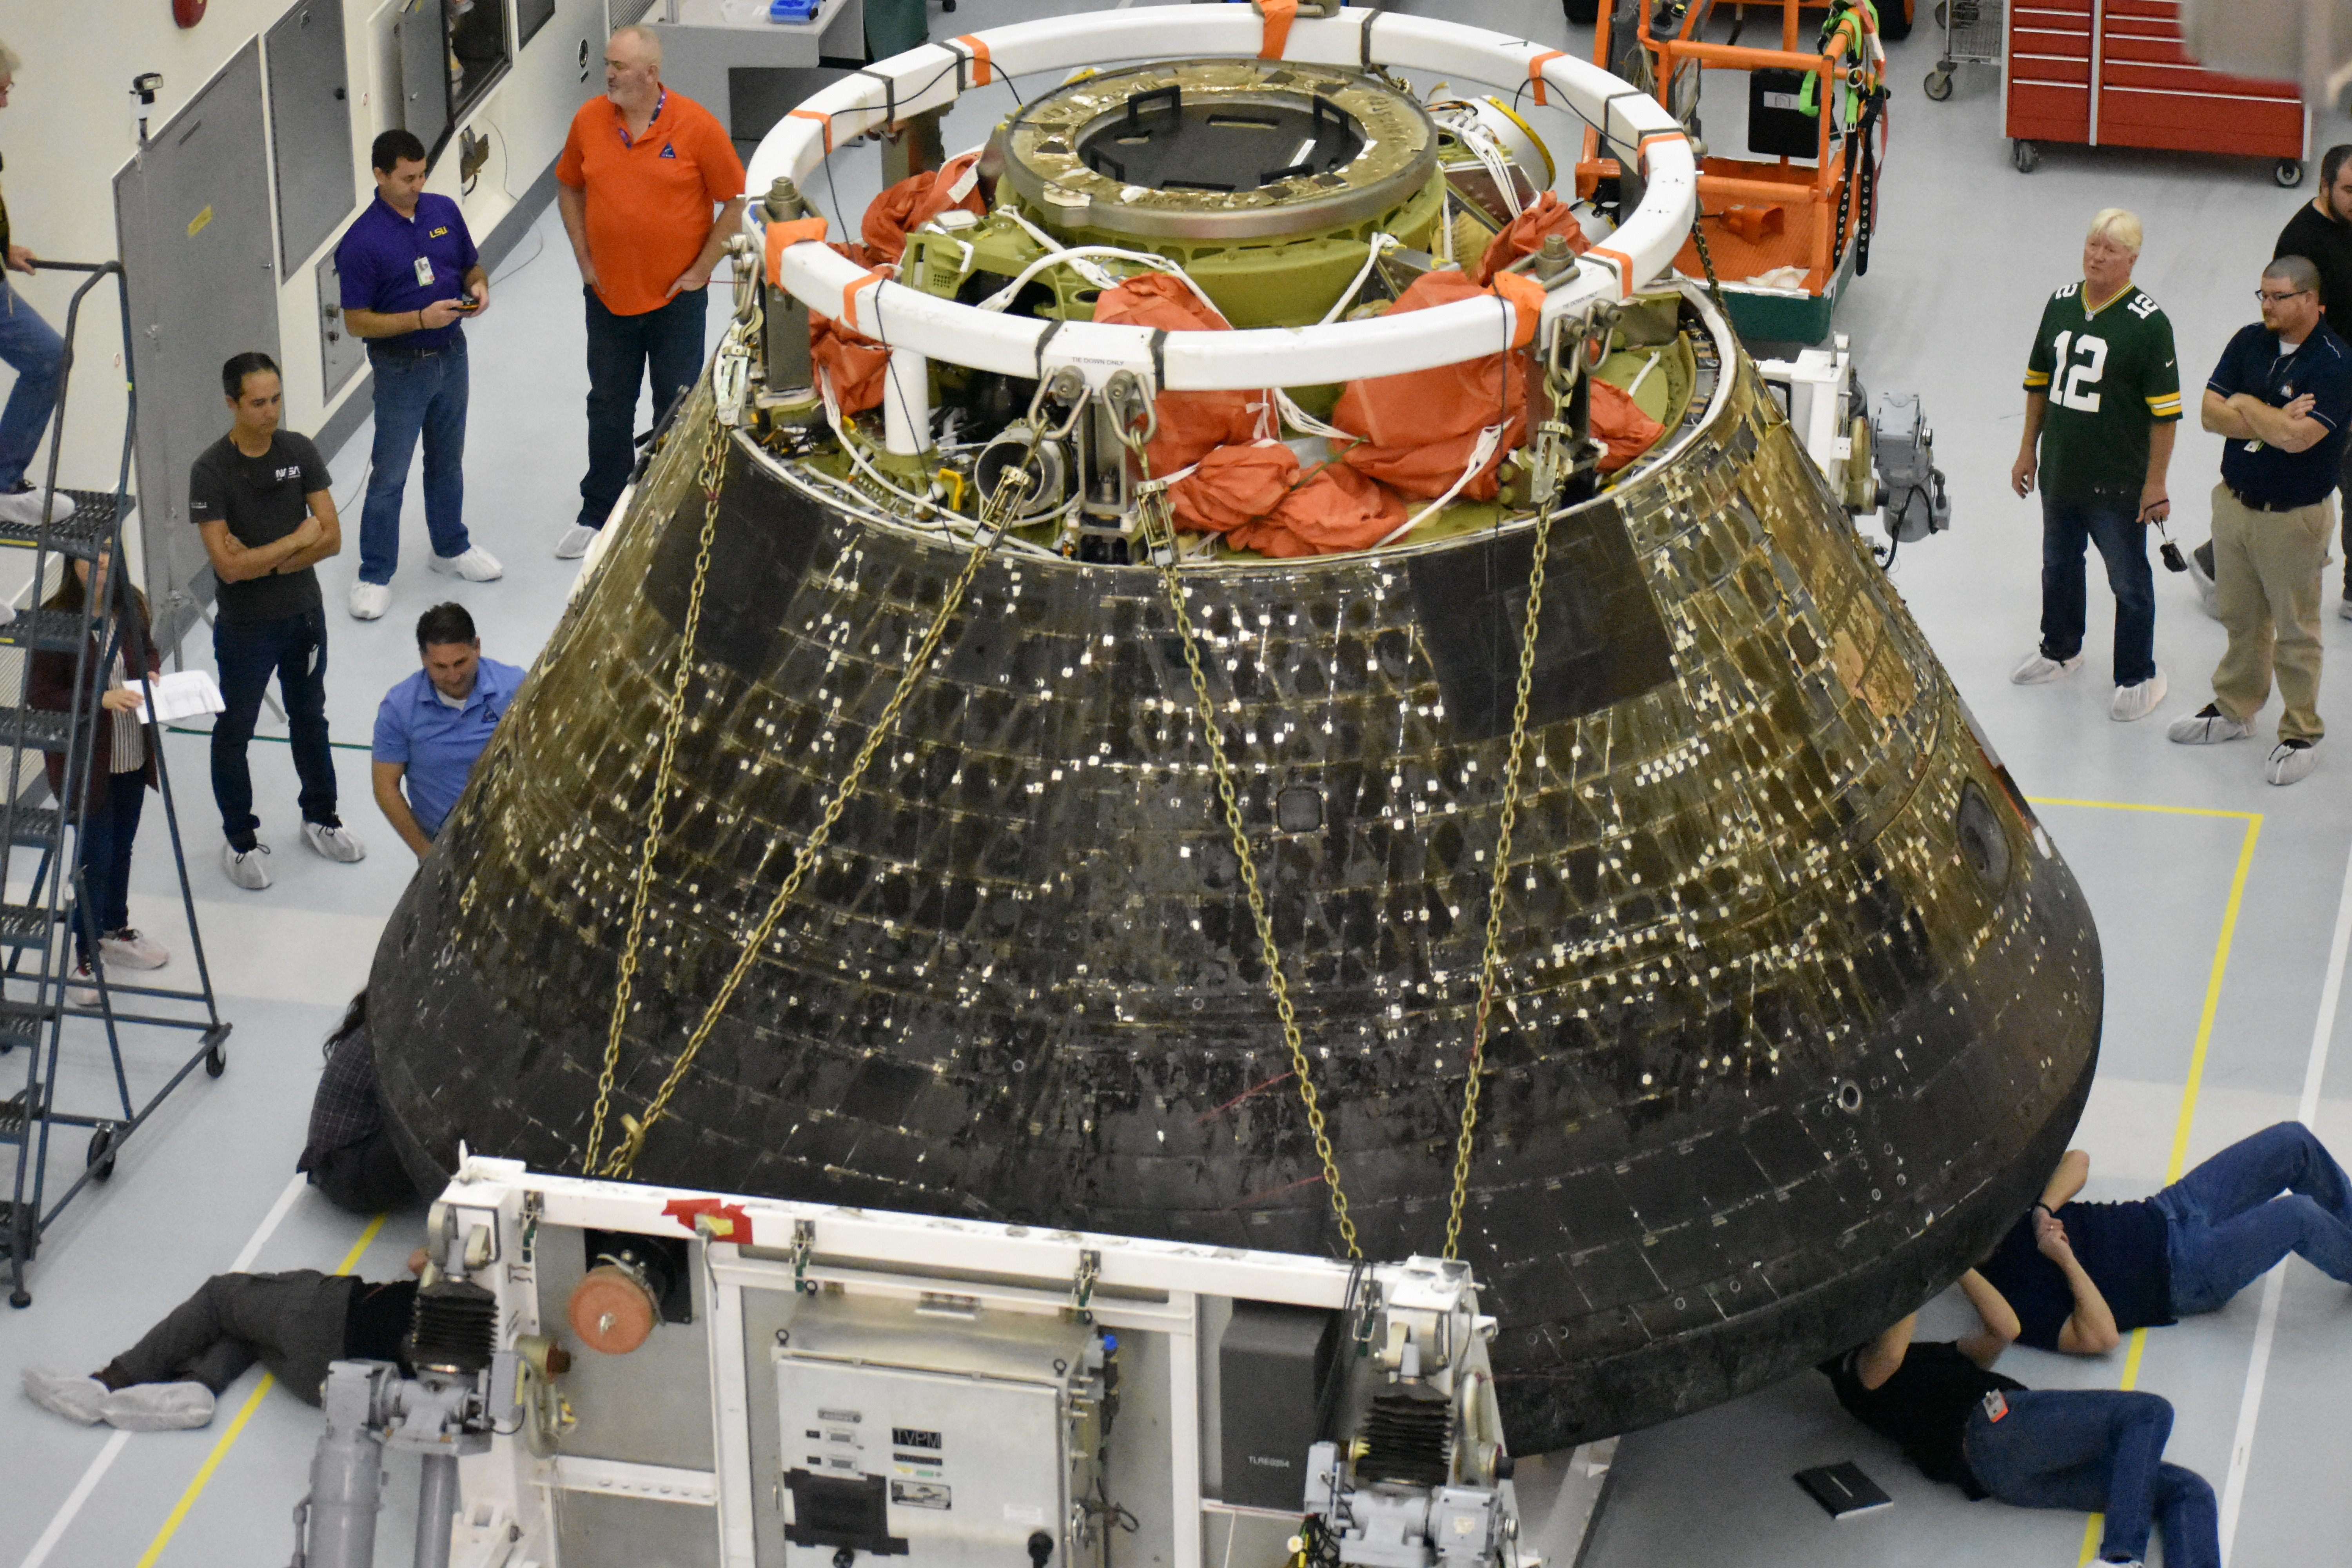 Technicians inspect the heat shield of the Artemis 1 Orion spacecraft at NASA's Kennedy Space Center in Florida.  The photo was published in January.  6, 2023.